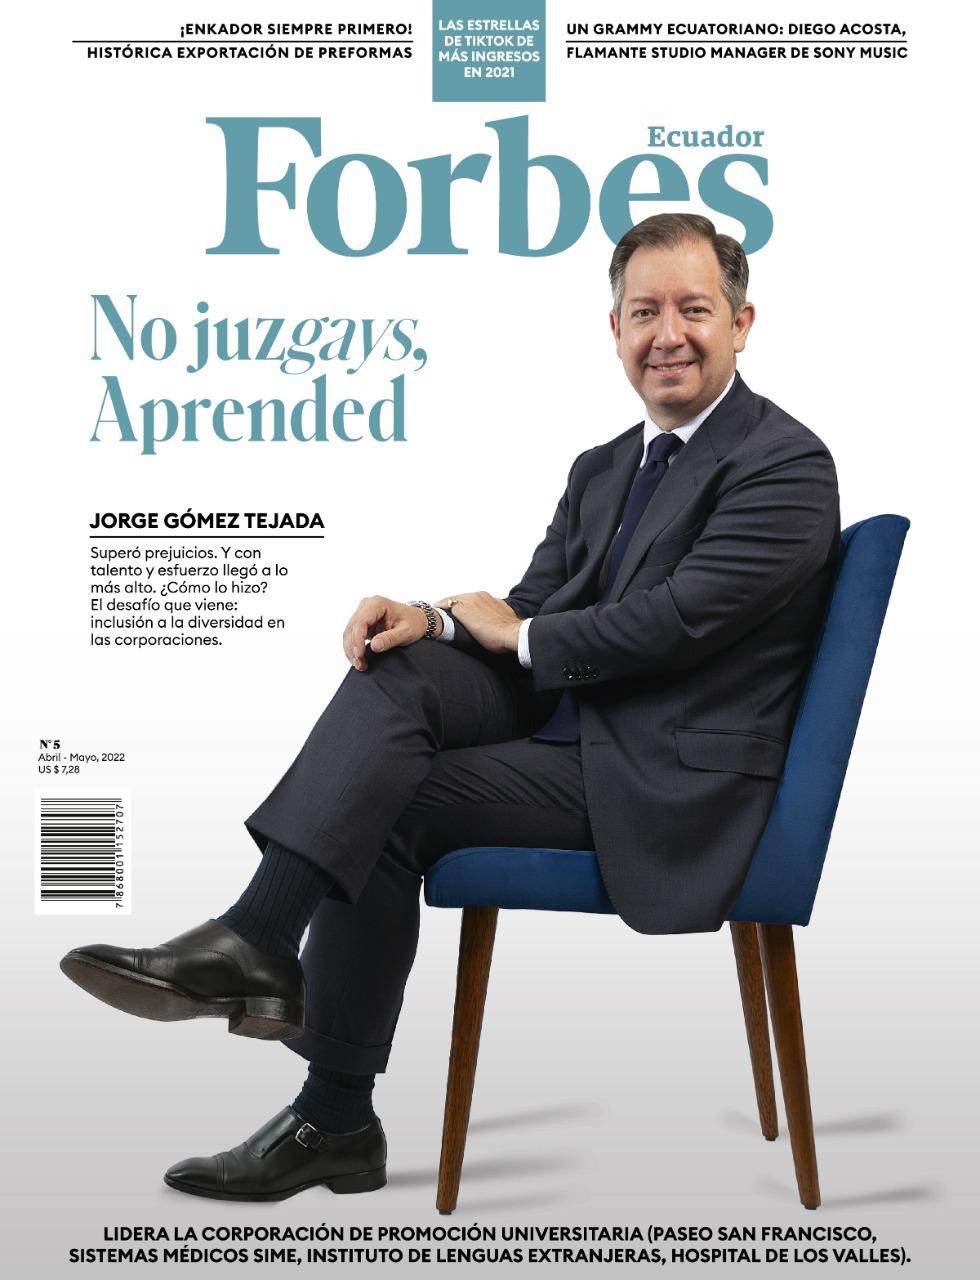 Jorge Gómez Tejada ’07 MAR, ’12 PhD poses, sitting on a chair with his legs crossed, for the cover of Forbes Ecuador